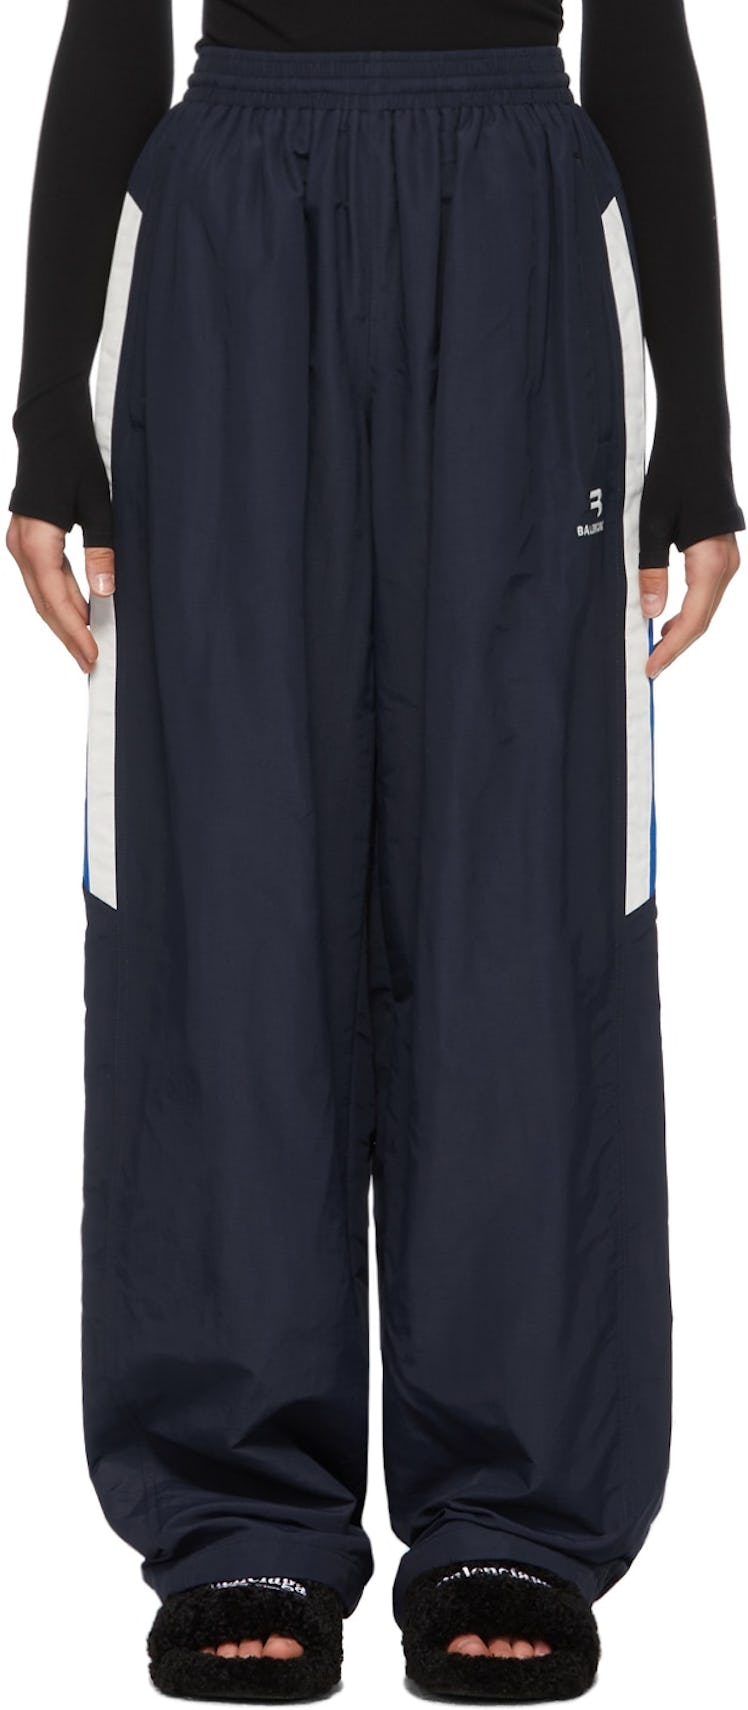 Navy One-Size Tracksuit Lounge Pants